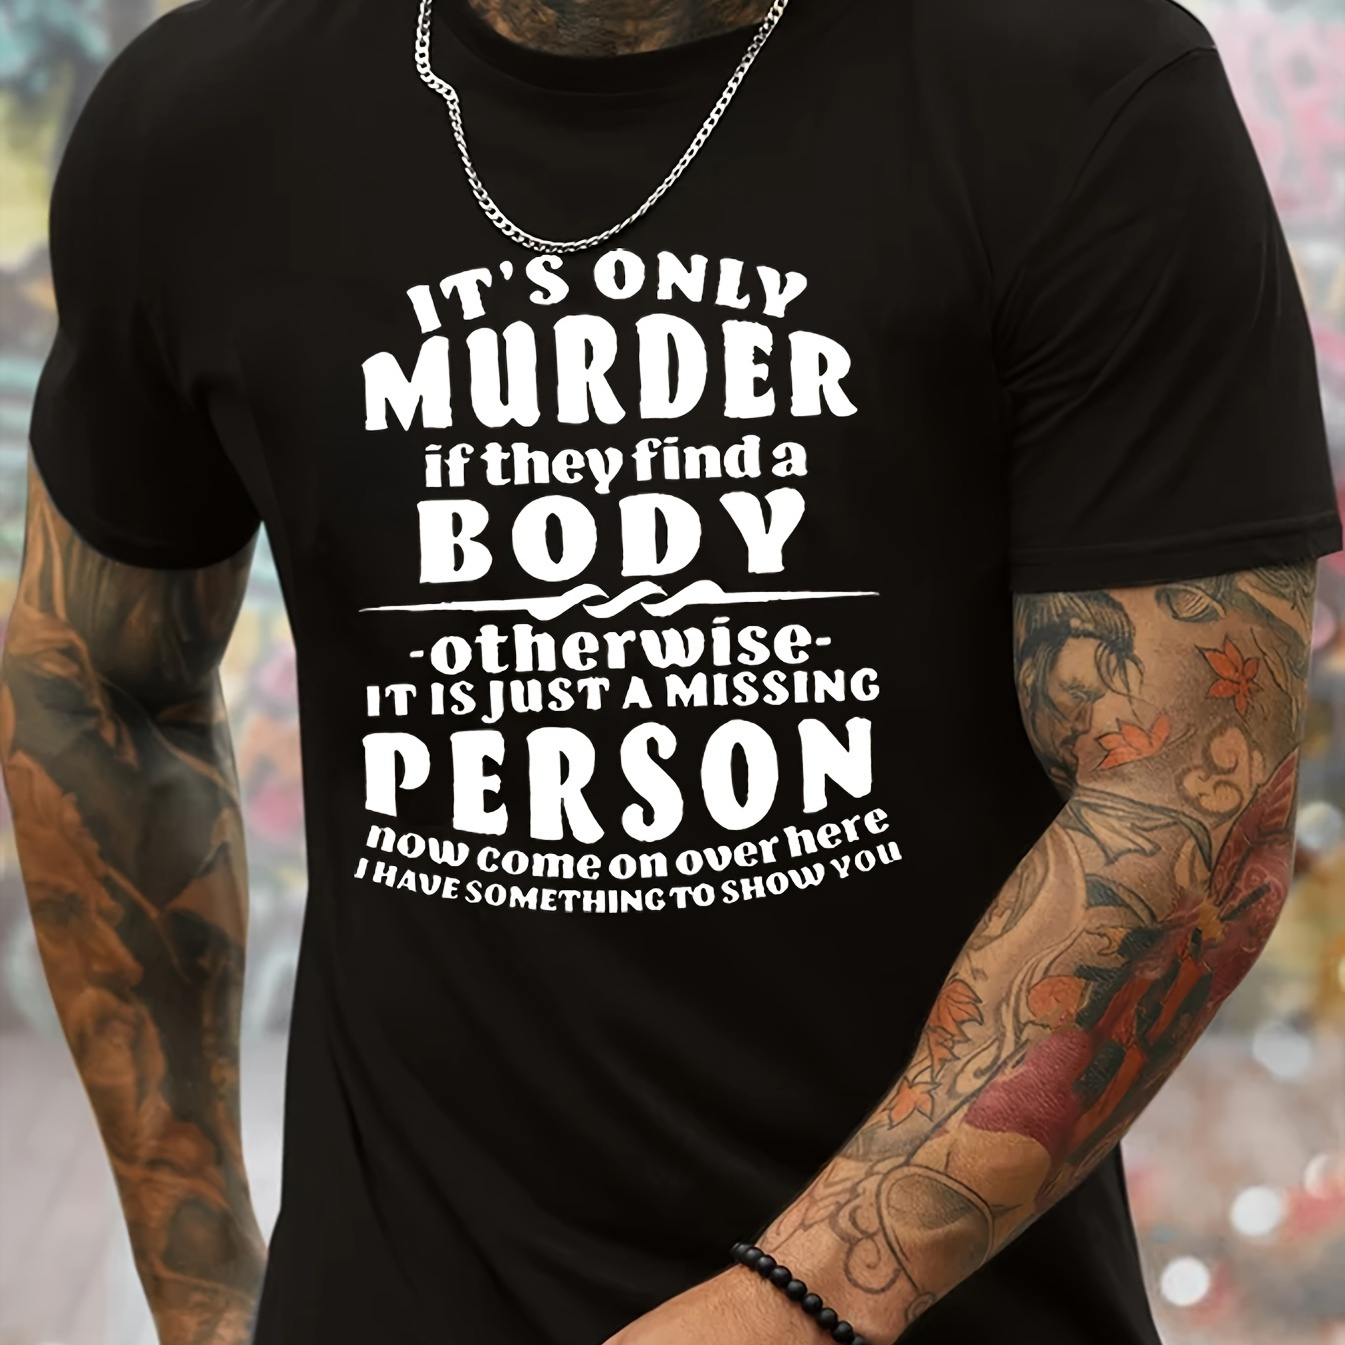 

It's Only Murder If They Find A Body... Print, Men's Novel Graphic Design T-shirt, Casual Comfy Tees For Summer, Men's Clothing Tops For Daily Activities